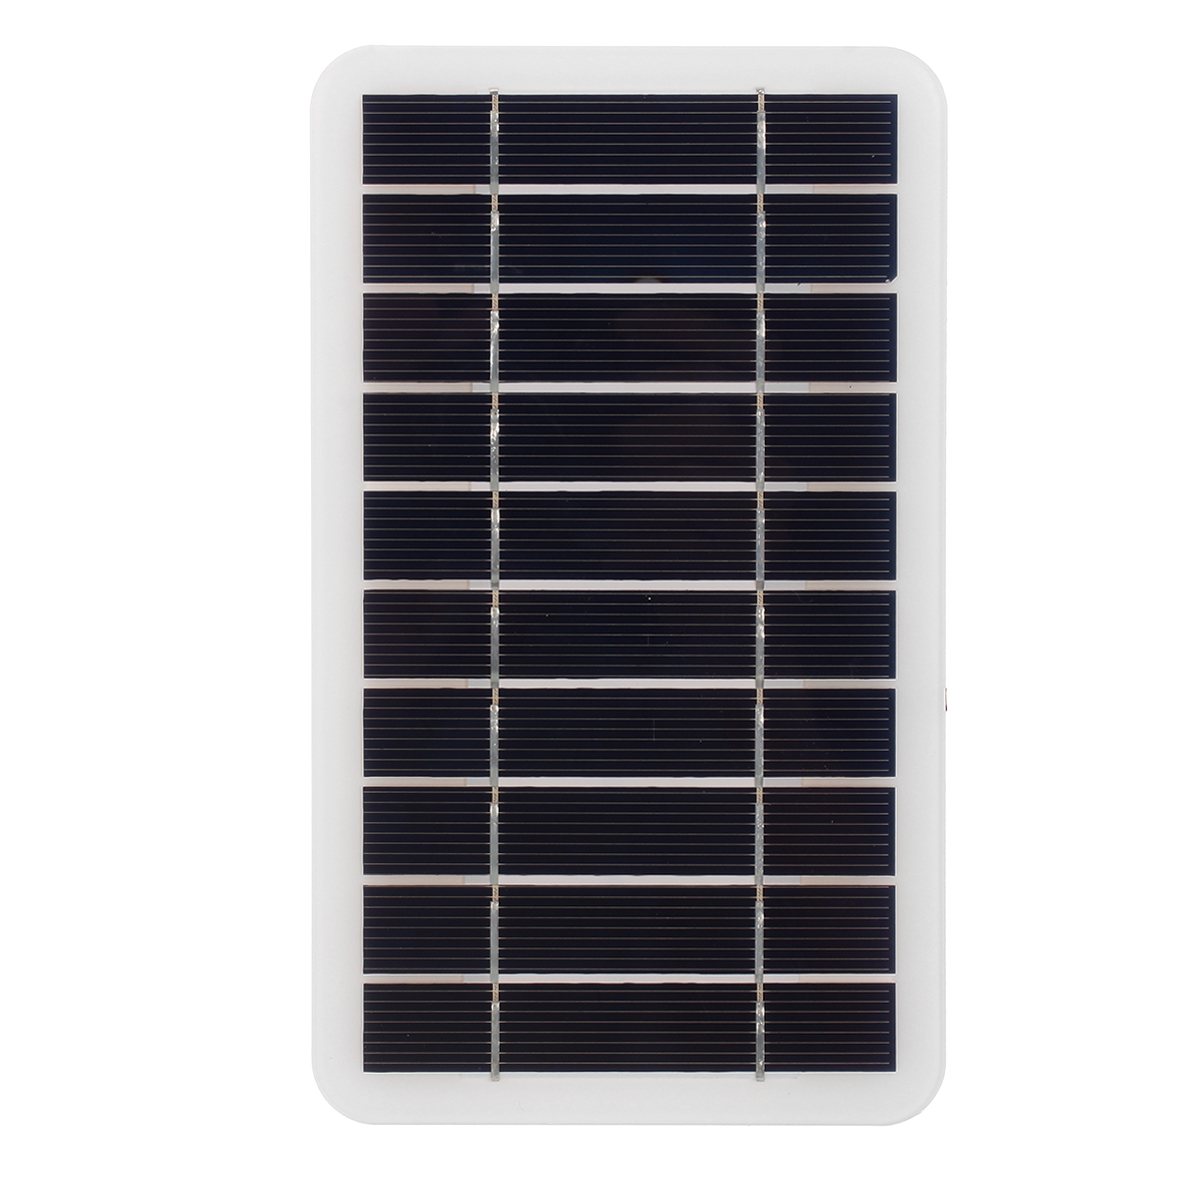 100W-Portable-Solar-Panel-Kit-Dual-DC-5V-USB-Charger-Kit-Solar-Power-Controller-with-Fans-1905897-6